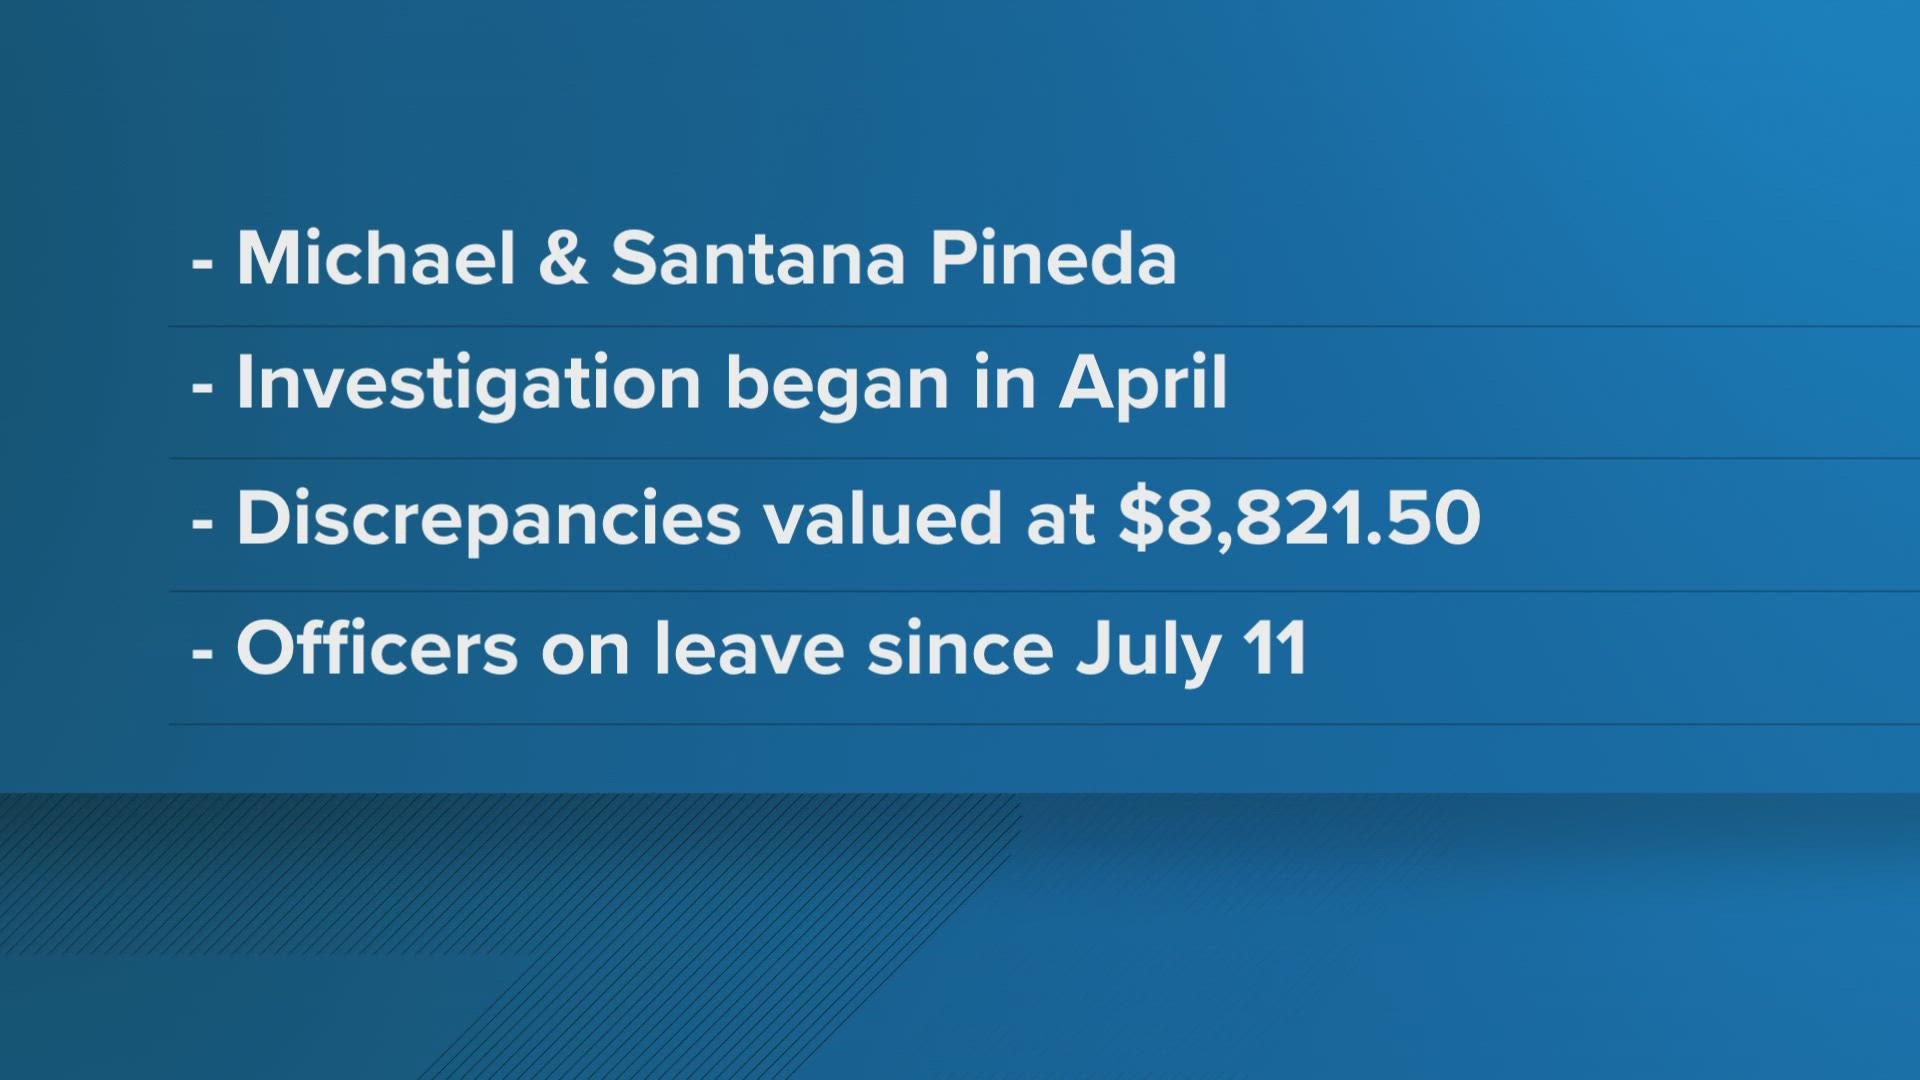 Michael and Santana Pineda are accused of billing off-duty hours to a private employer for hours not worked, Denver Police Department said.